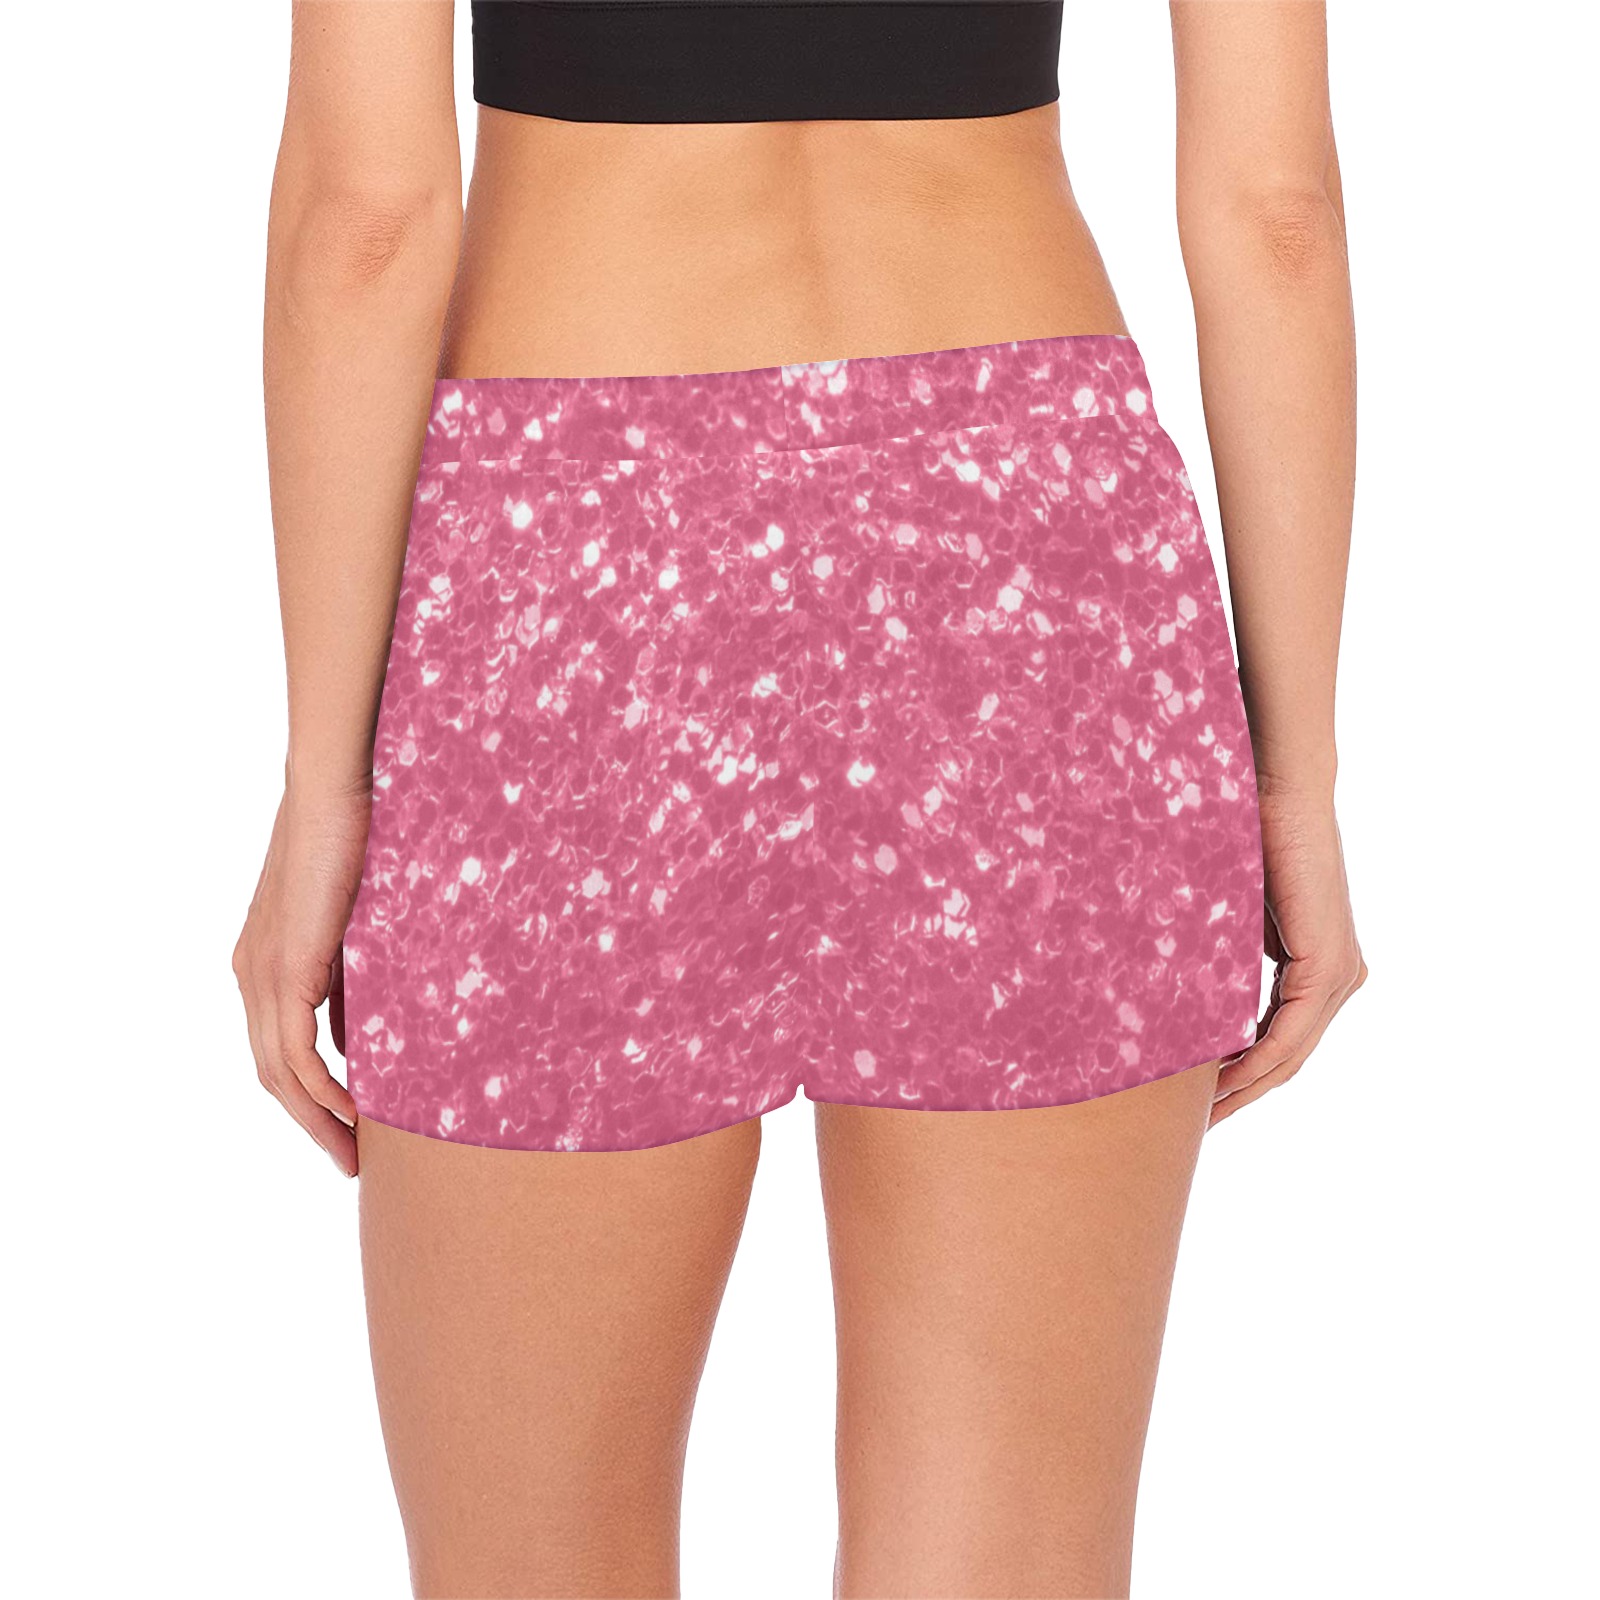 Magenta light pink red faux sparkles glitter Women's Pajama Shorts